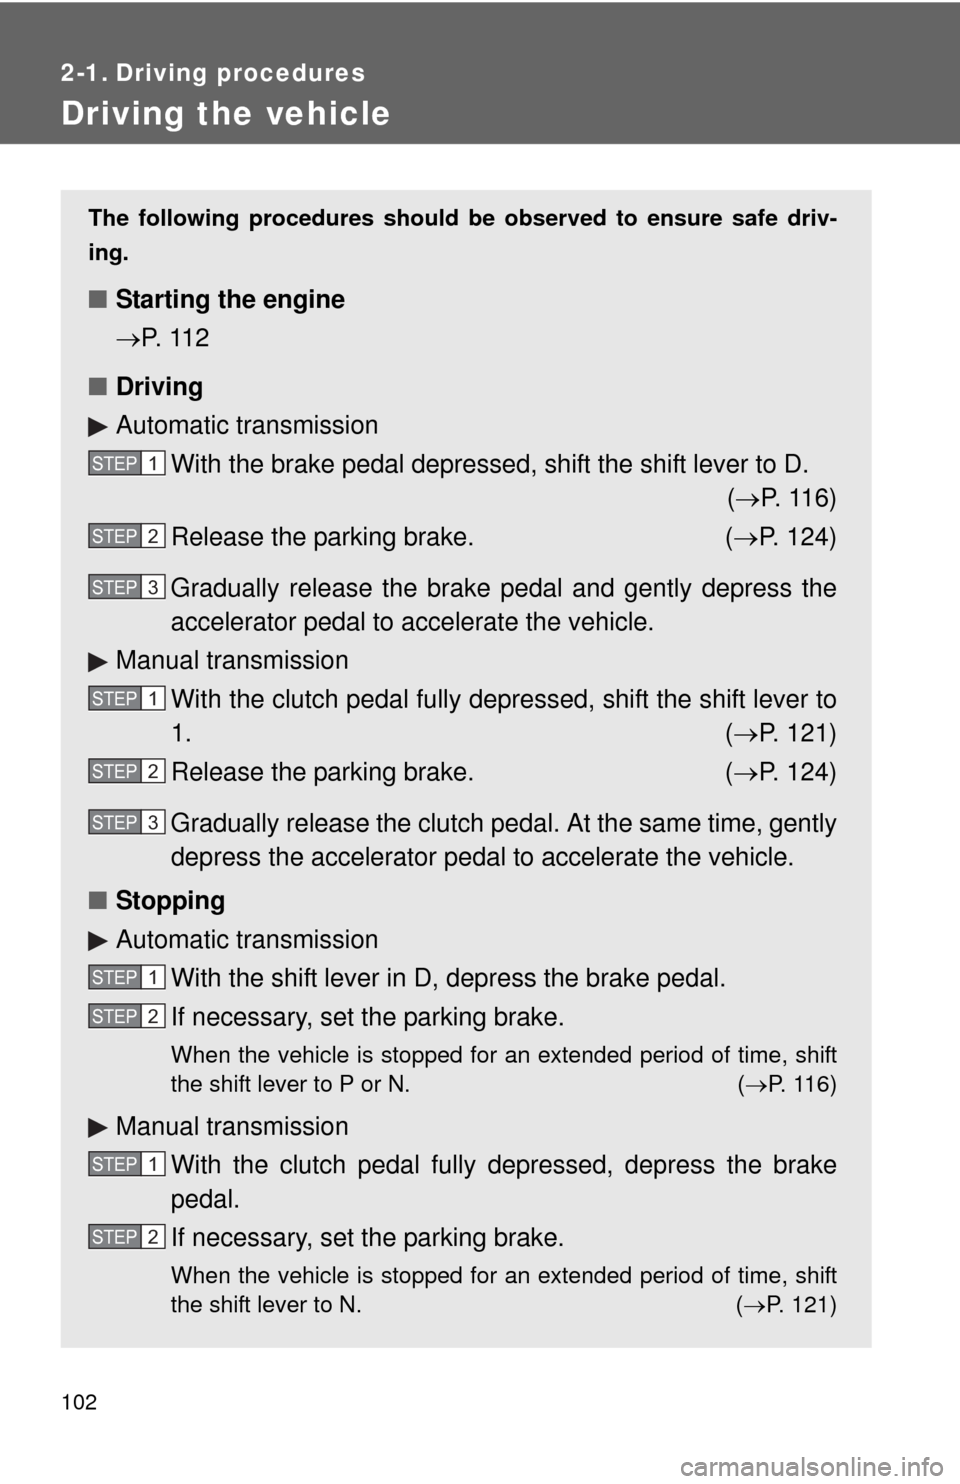 TOYOTA MATRIX 2010 E140 / 2.G Owners Manual 102
2-1. Driving procedures
Driving the vehicle
The following procedures should be observed to ensure safe driv-
ing.
■Starting the engine 
P.  11 2
■Driving
Automatic transmission
With the bra